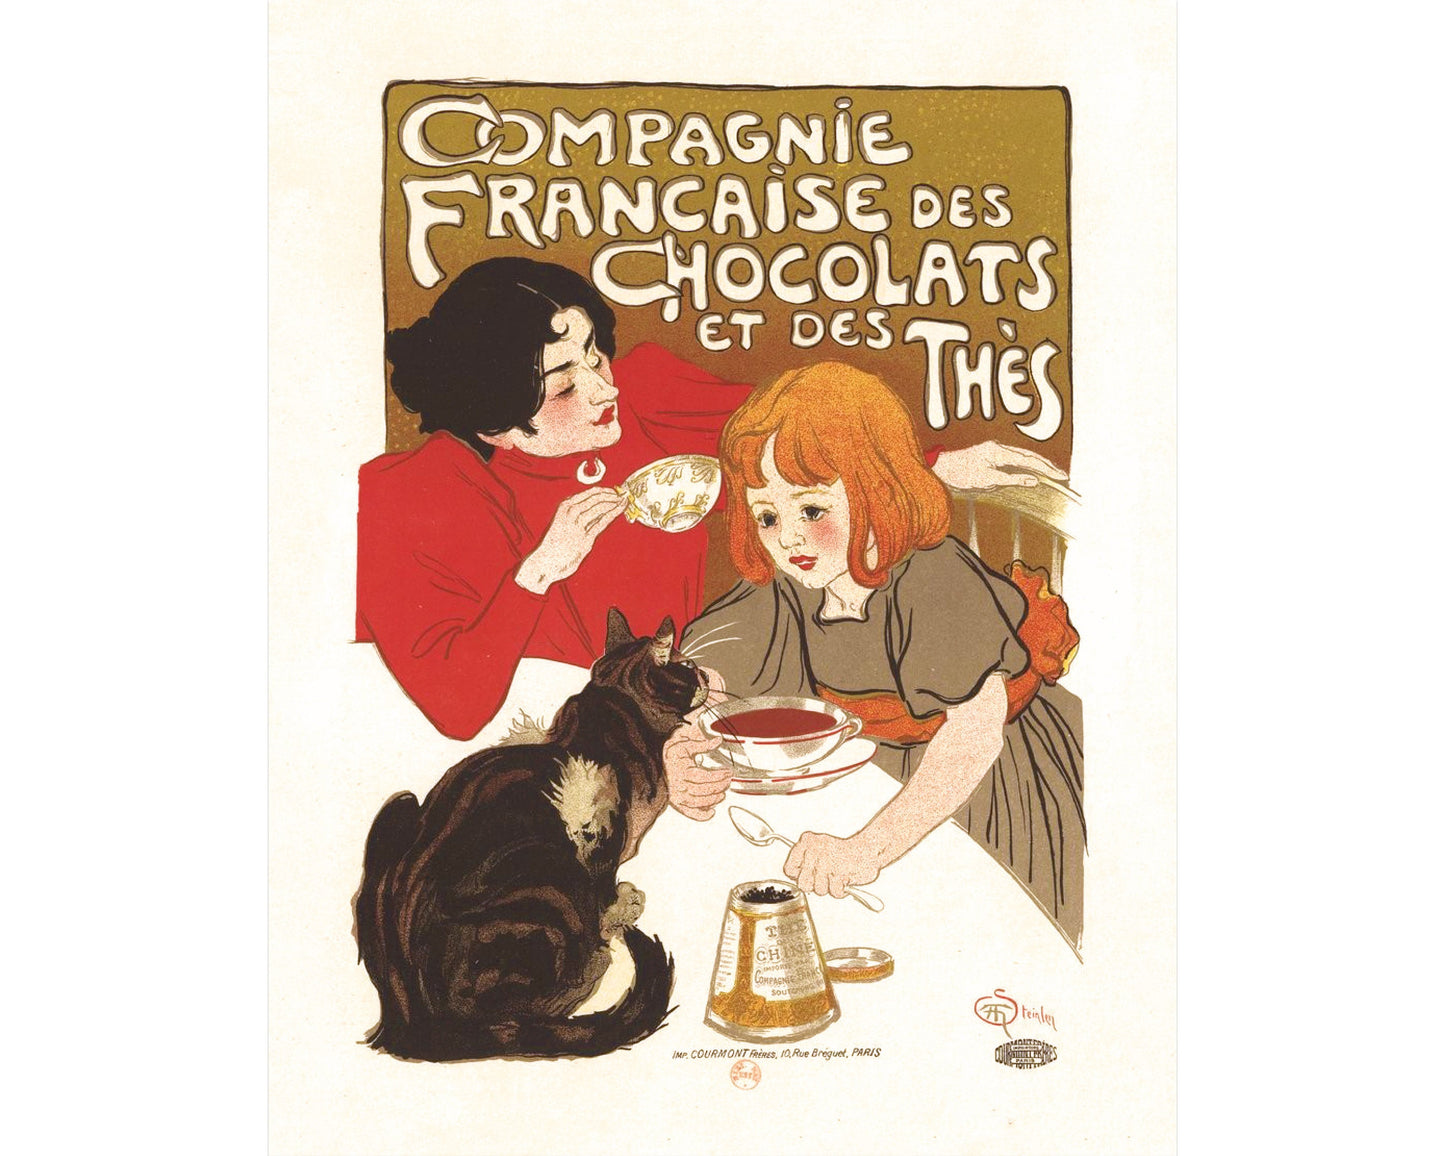 French chocolate & tea advertisement | Vintage woman, girl and cat | Theophile Steinlen print | Kitchen and cafe wall art | Antique food ad